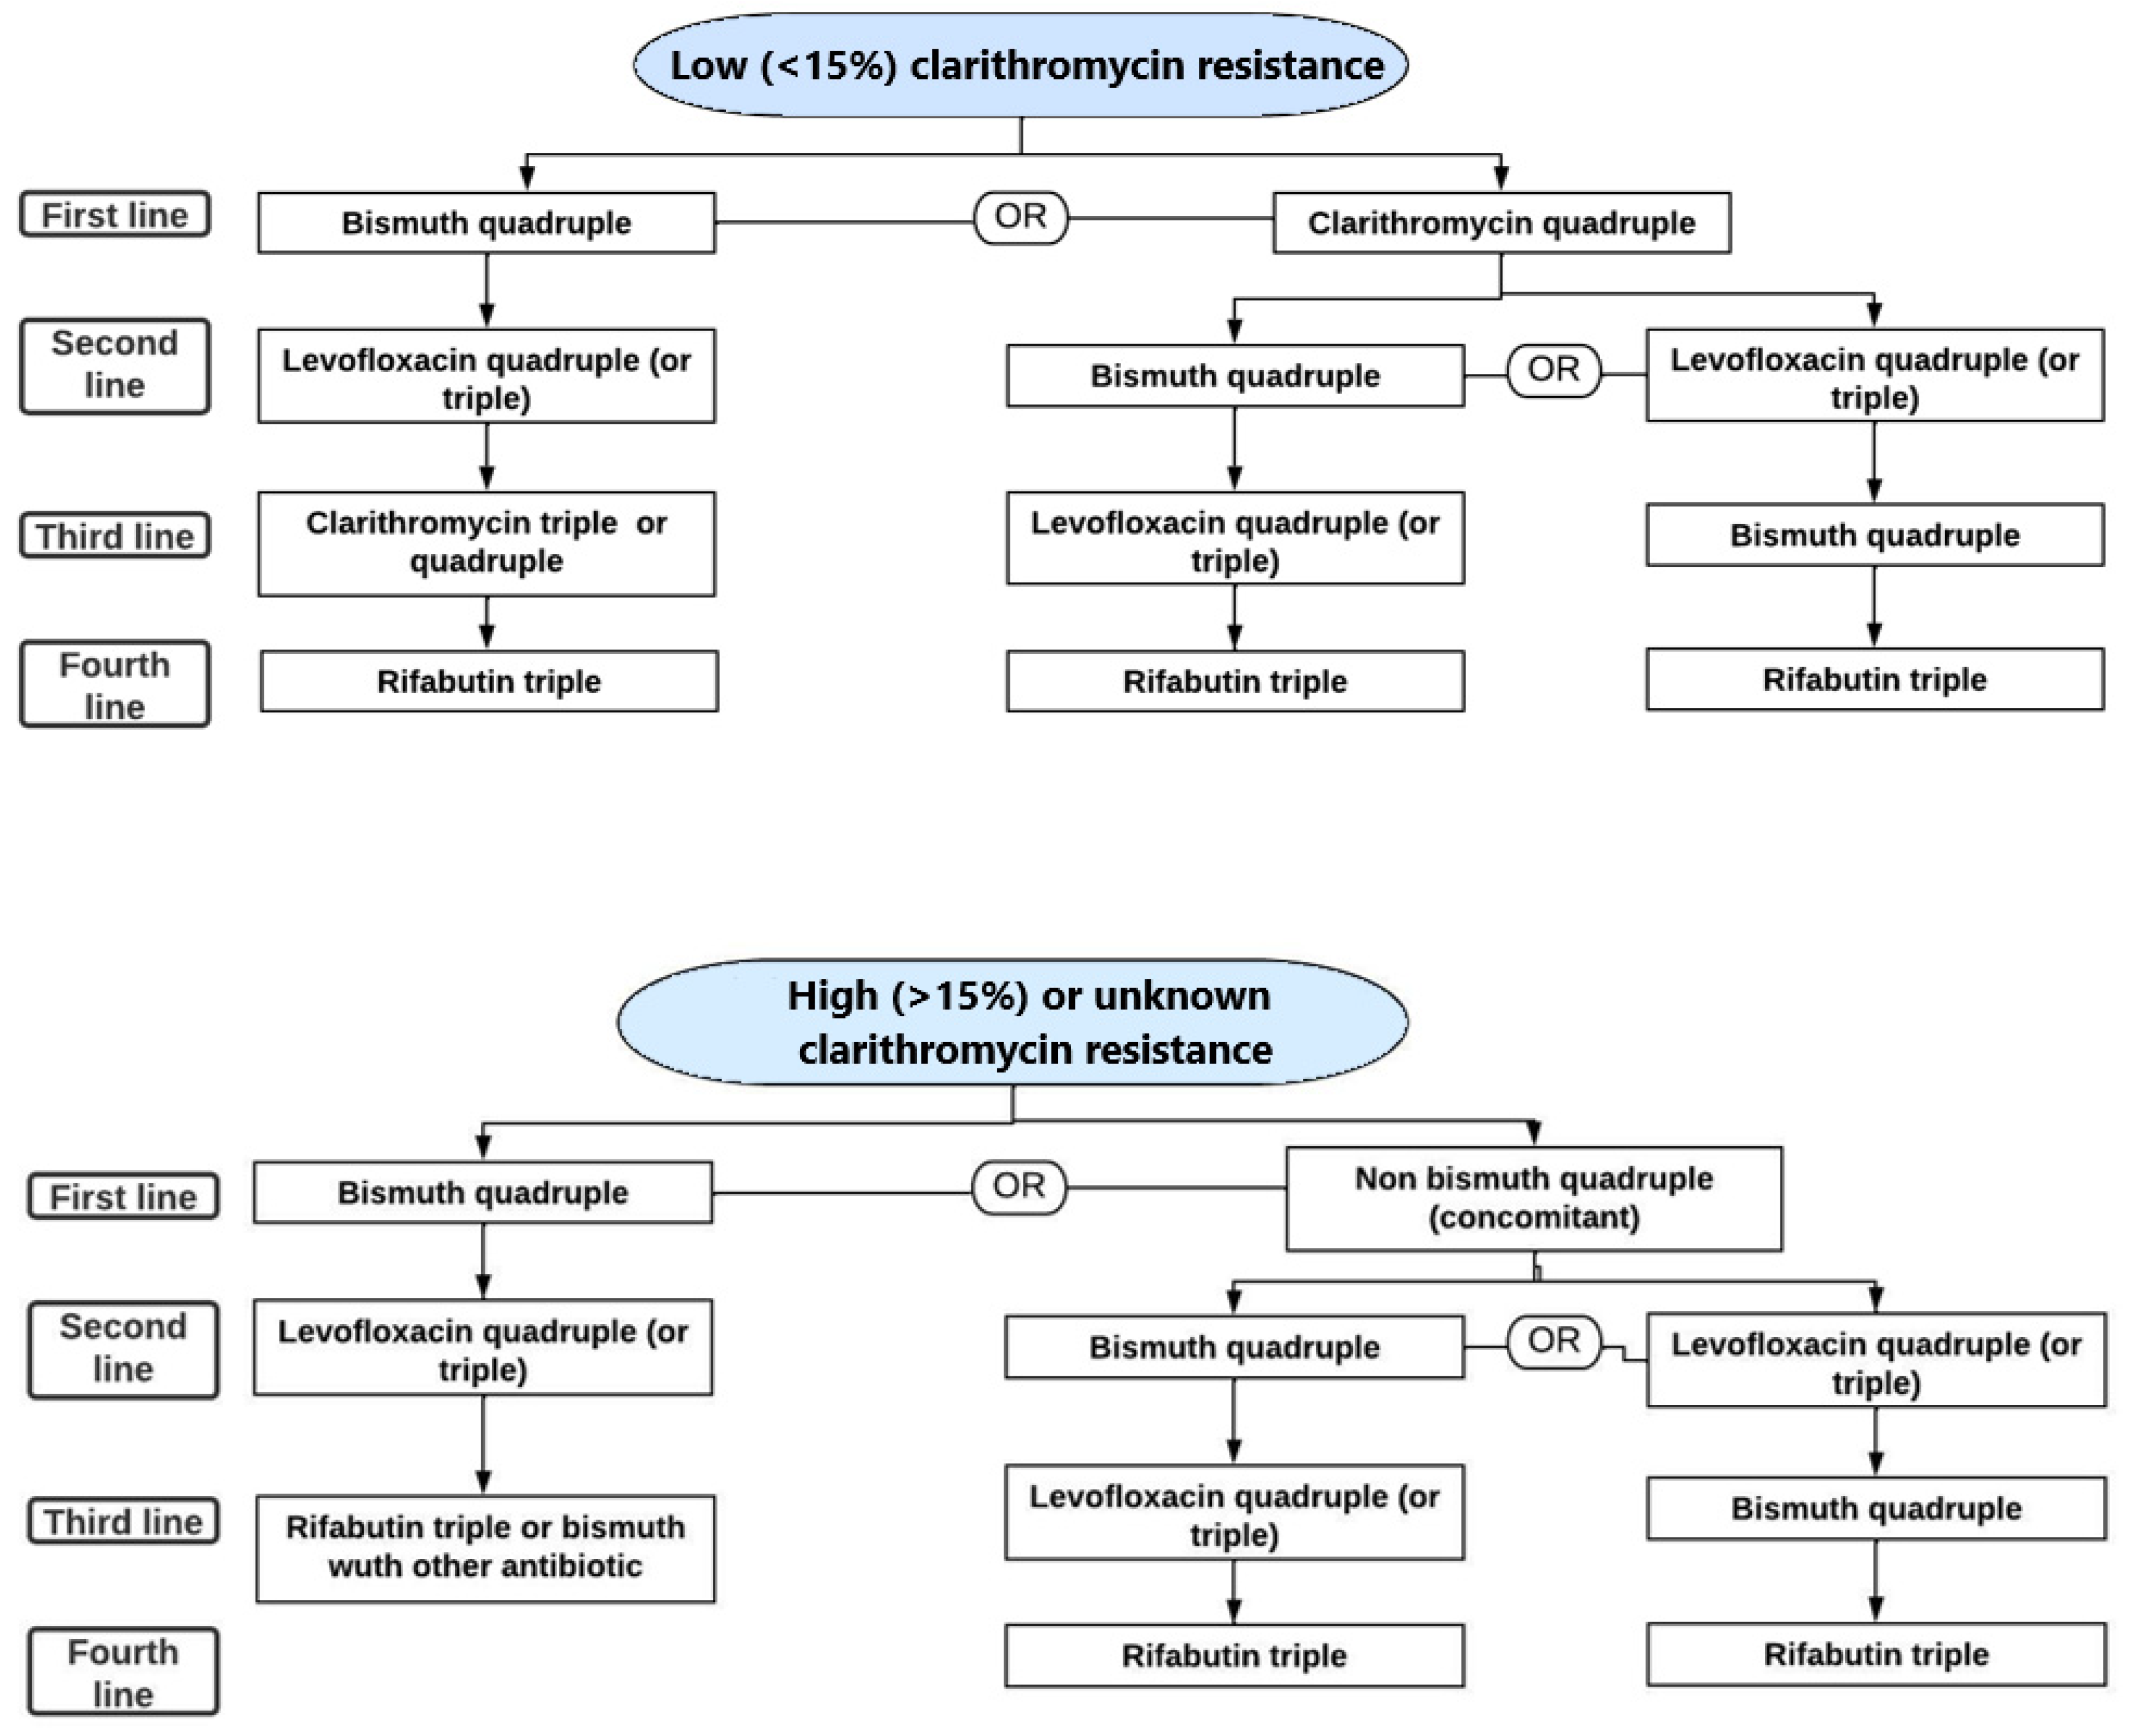 Effectiveness of management strategies for uninvestigated dyspepsia:  systematic review and network meta-analysis